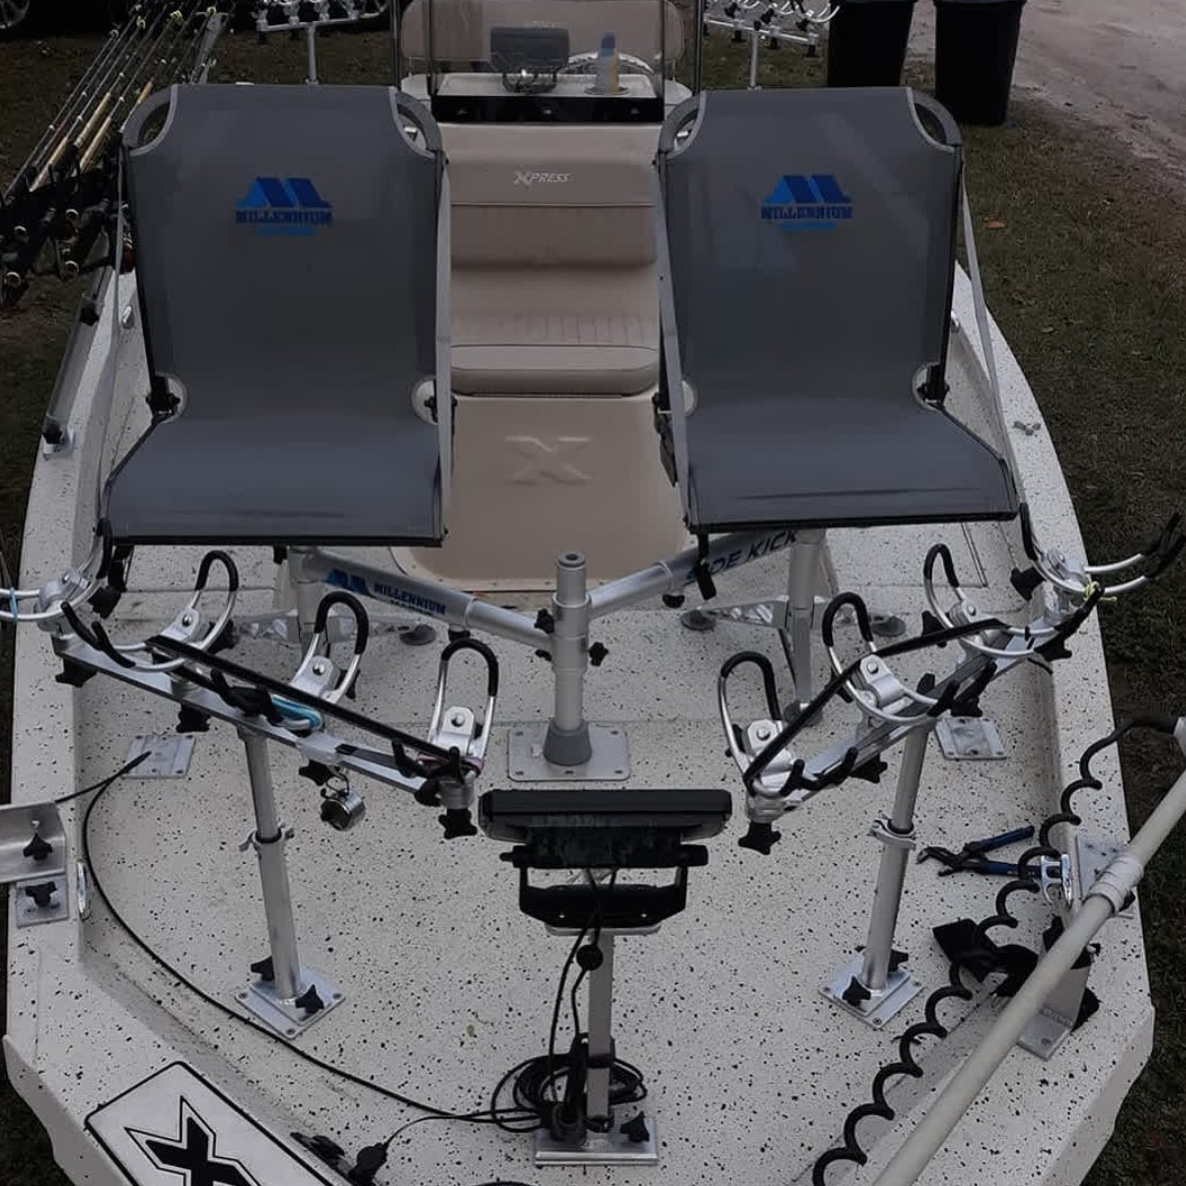 https://www.outdoorsfirst.com/crappie/wp-content/uploads/sites/8/2020/03/unnamed.png